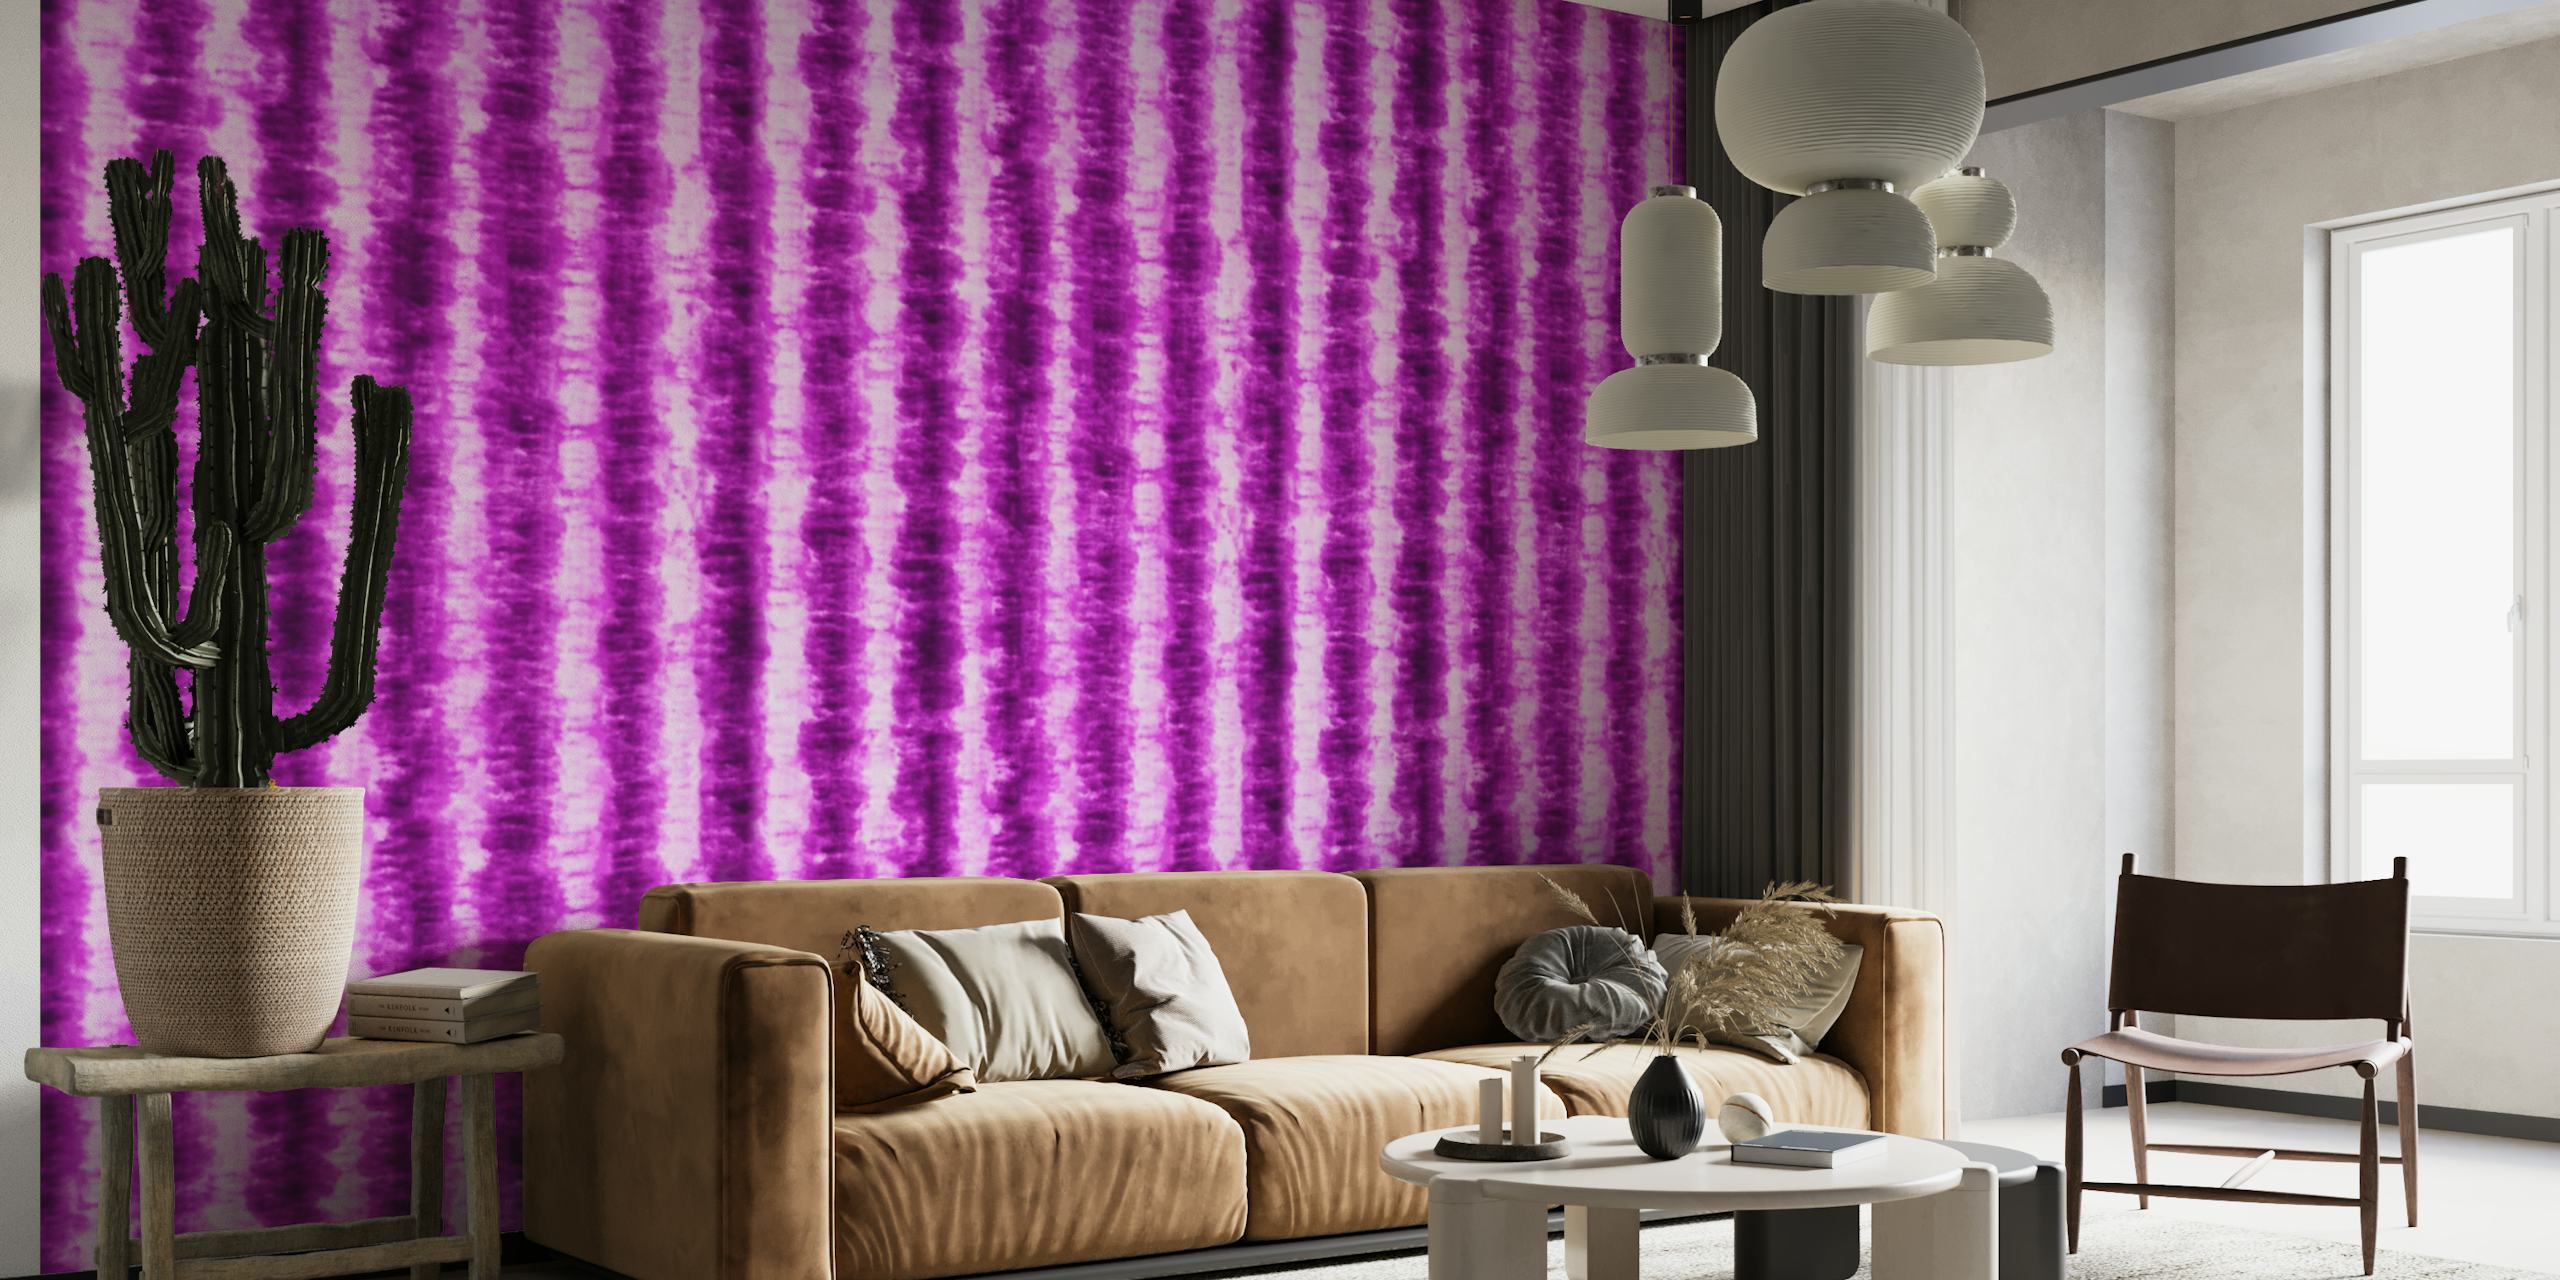 Vibrant purple tie-dye pattern wall mural from Happywall, ideal for eclectic home decor.